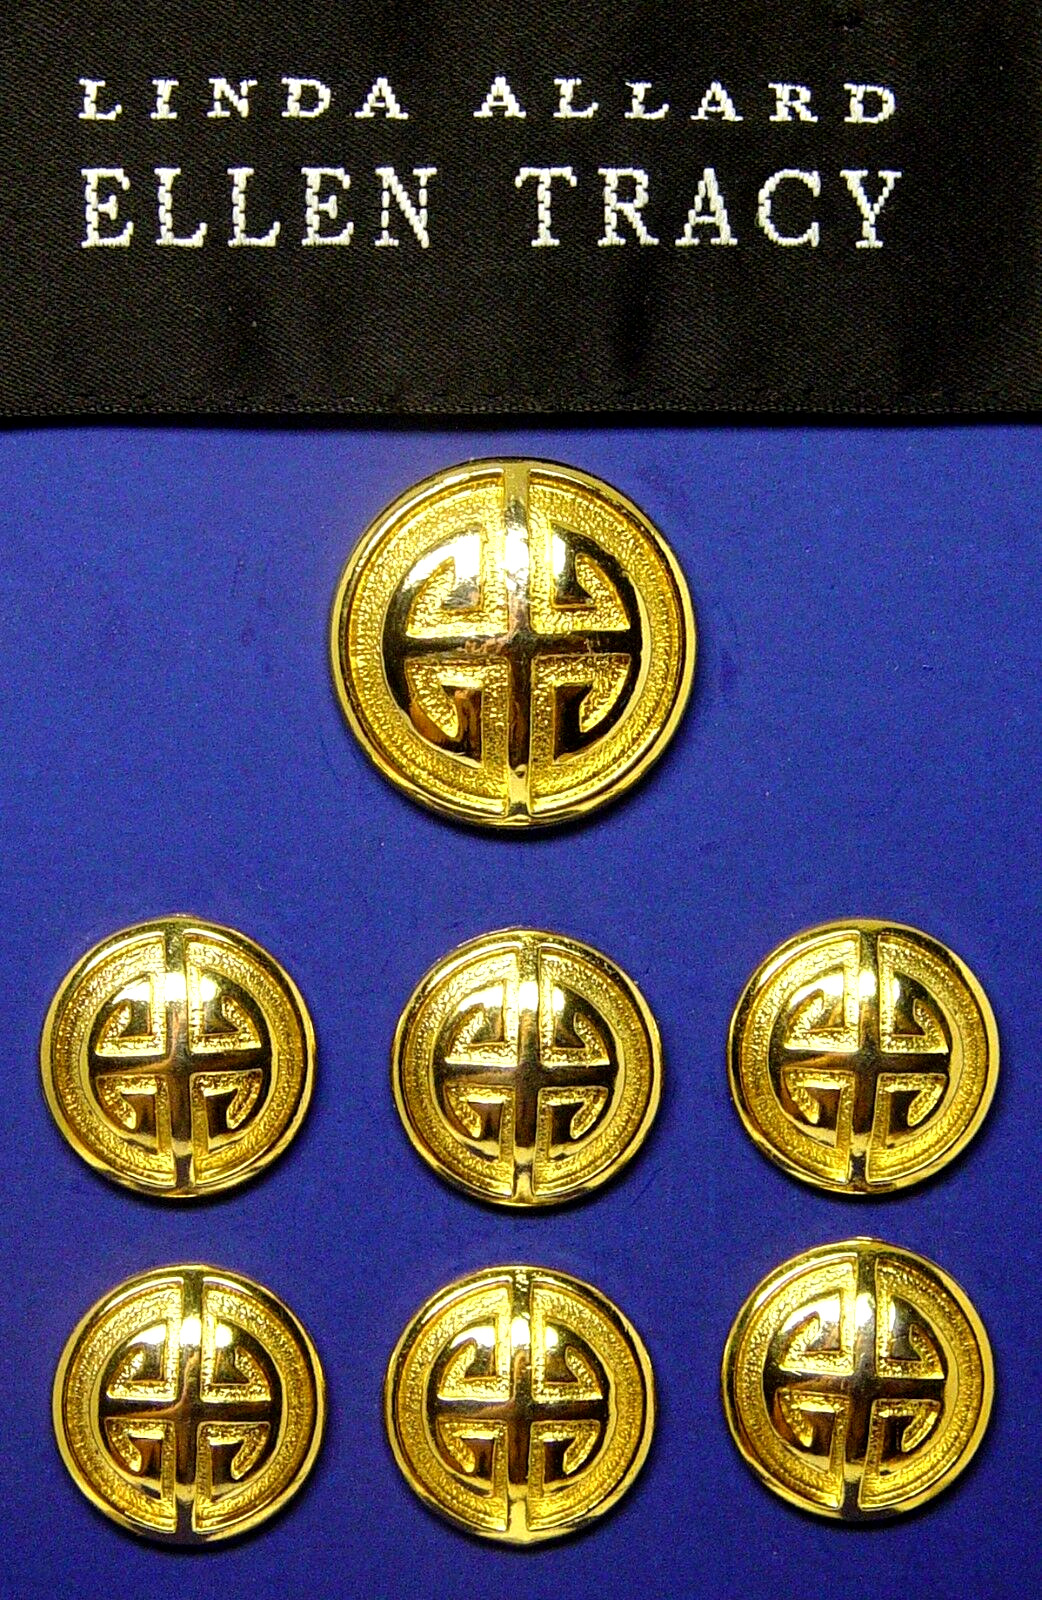 ELLEN TRACY REPLACEMENT BUTTONS 7 Shiny Gold TONE METAL BUTTONS, EXCELLENT COND.